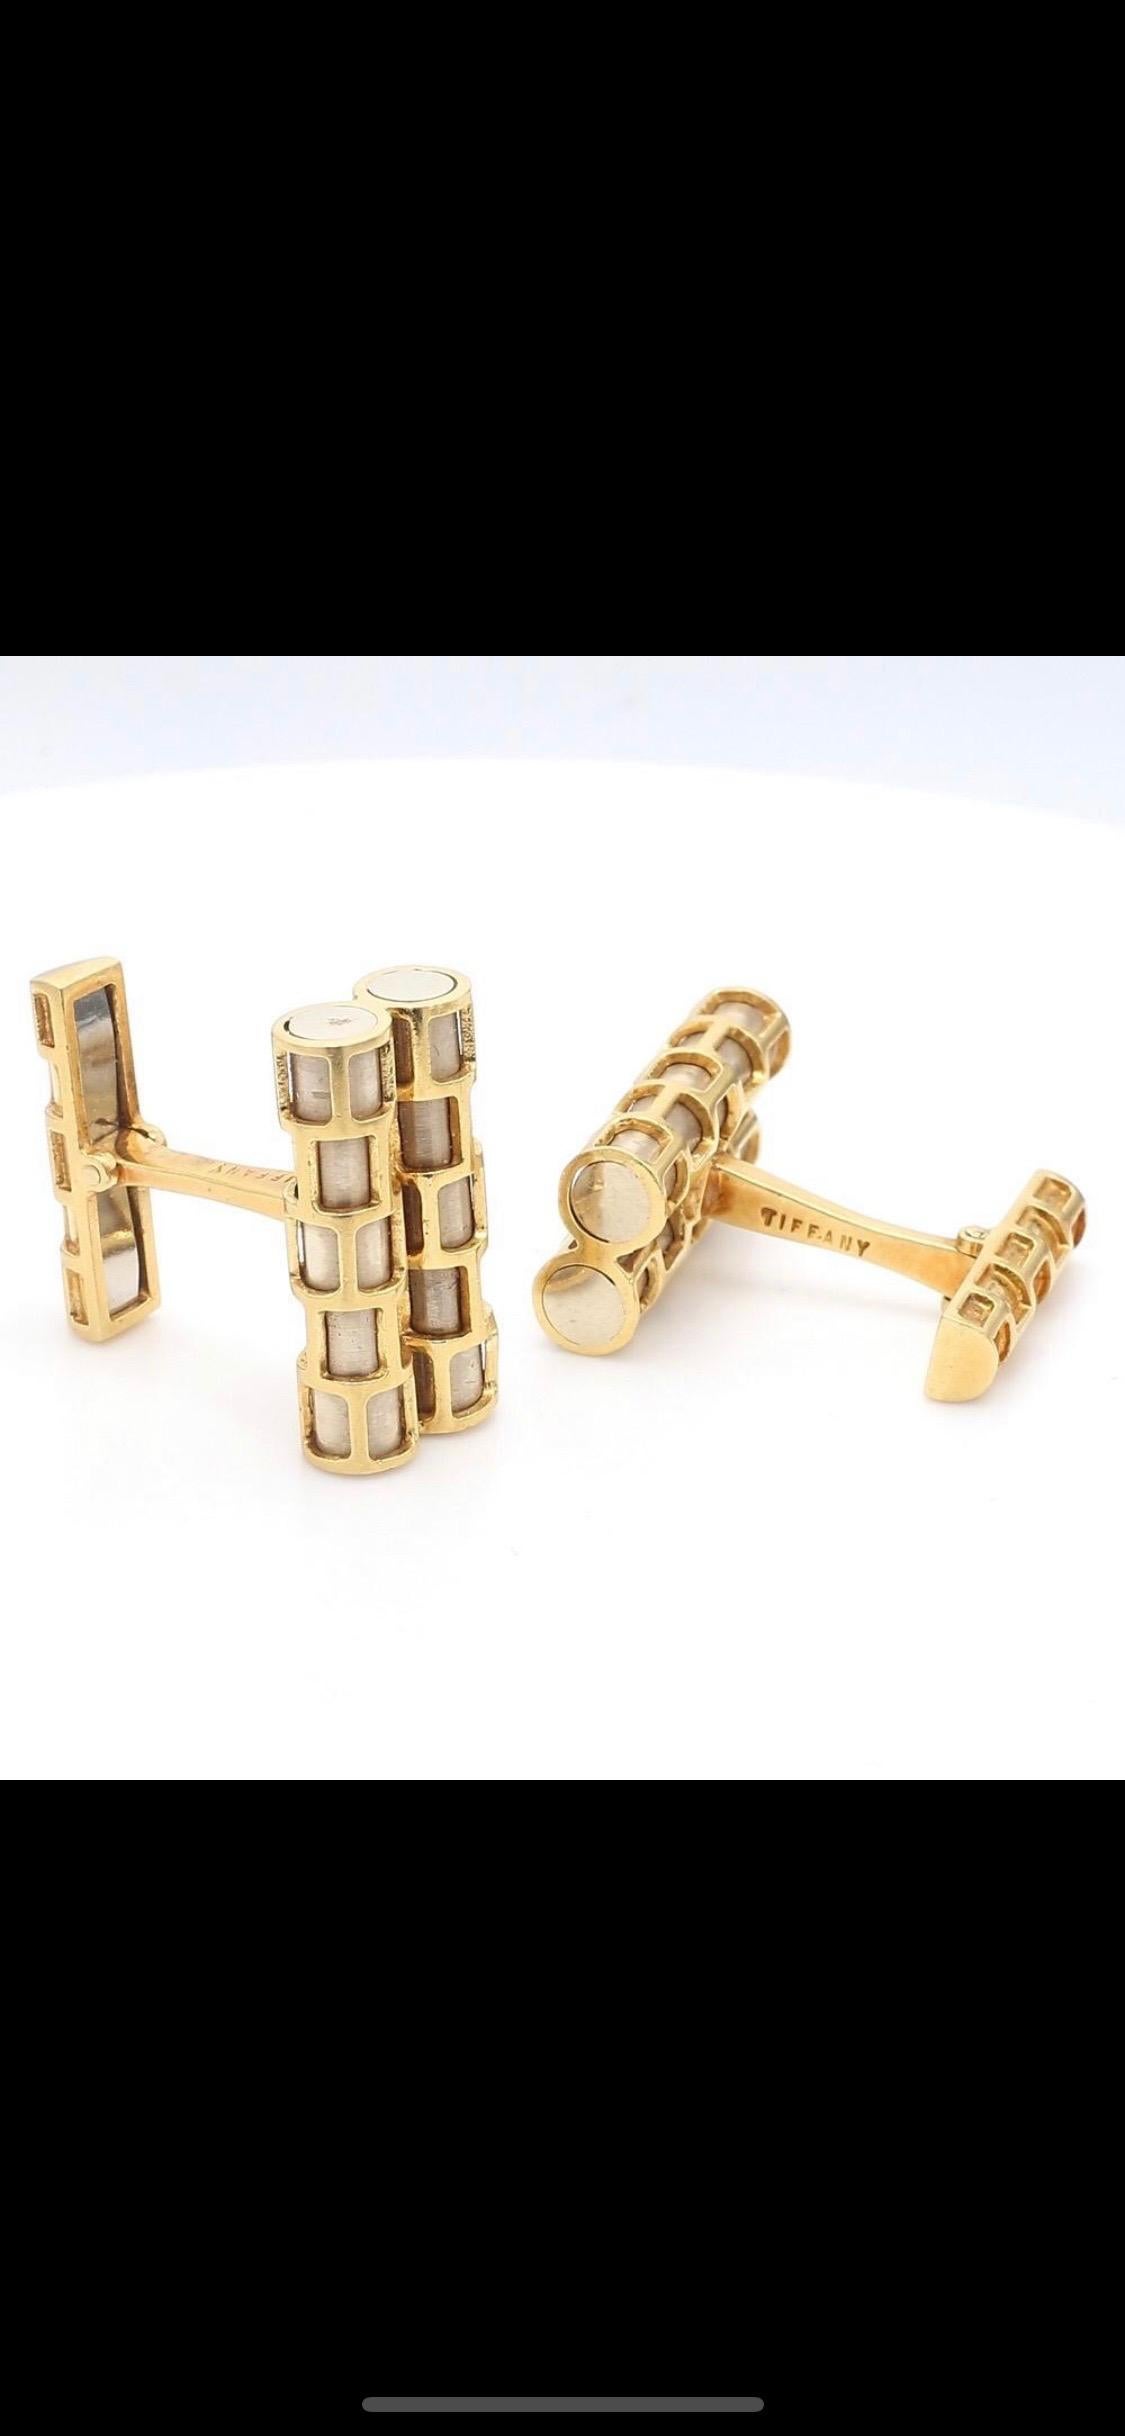 Tiffany & Co. 18k Gold gentlemen 
cufflinks.
These classy cufflinks truly exemplify Tiffany of the 80’s, refined elegance at its best.
Signed Tiffany. 

Viewings available in our NYC wholesale office by appointment. Please contact us for more